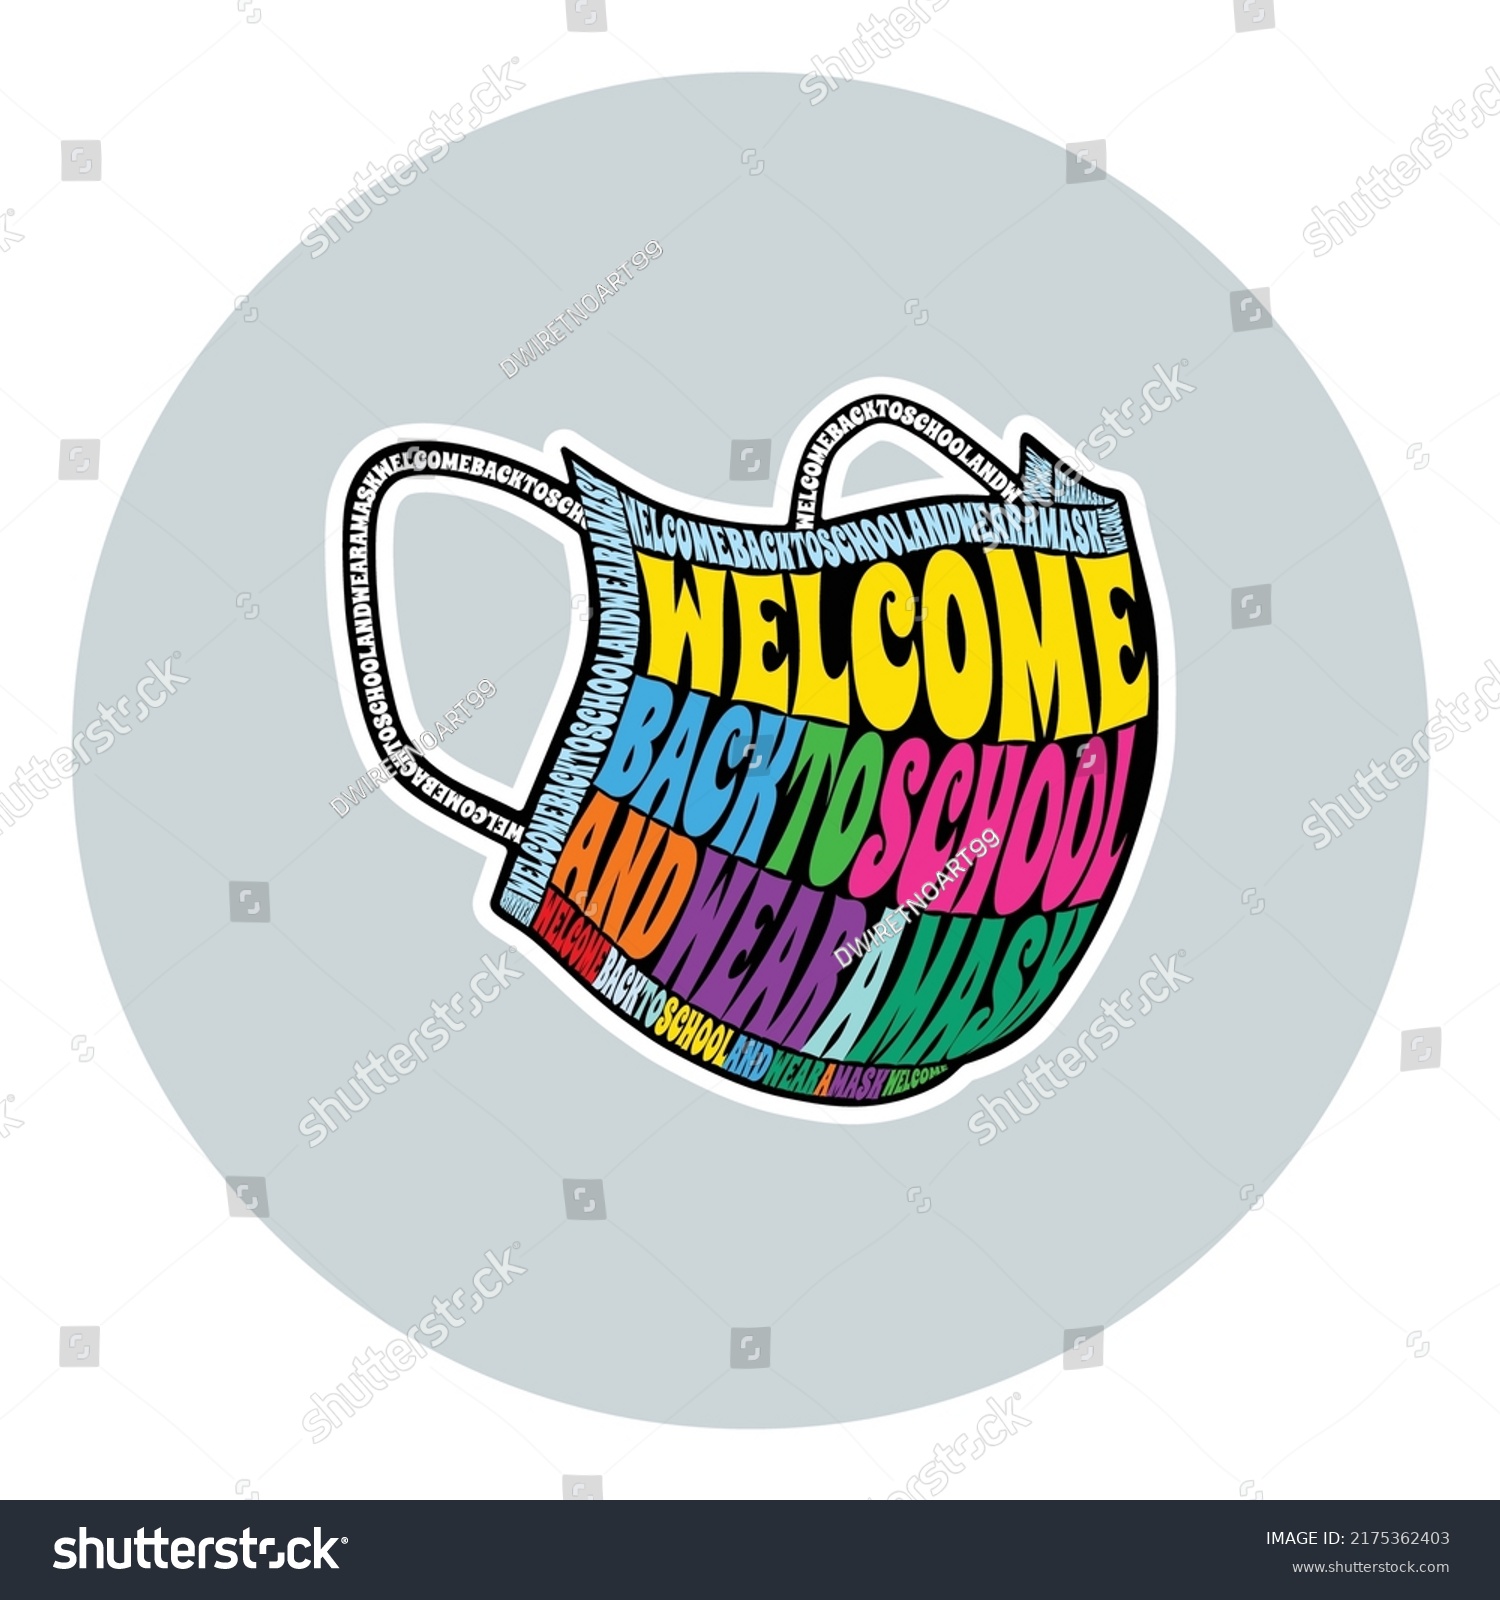 SVG of Welcome Back To School and Wear a Mask, Text Warp Art in Form of Face Mask Colorful Vector Svg illustration. svg